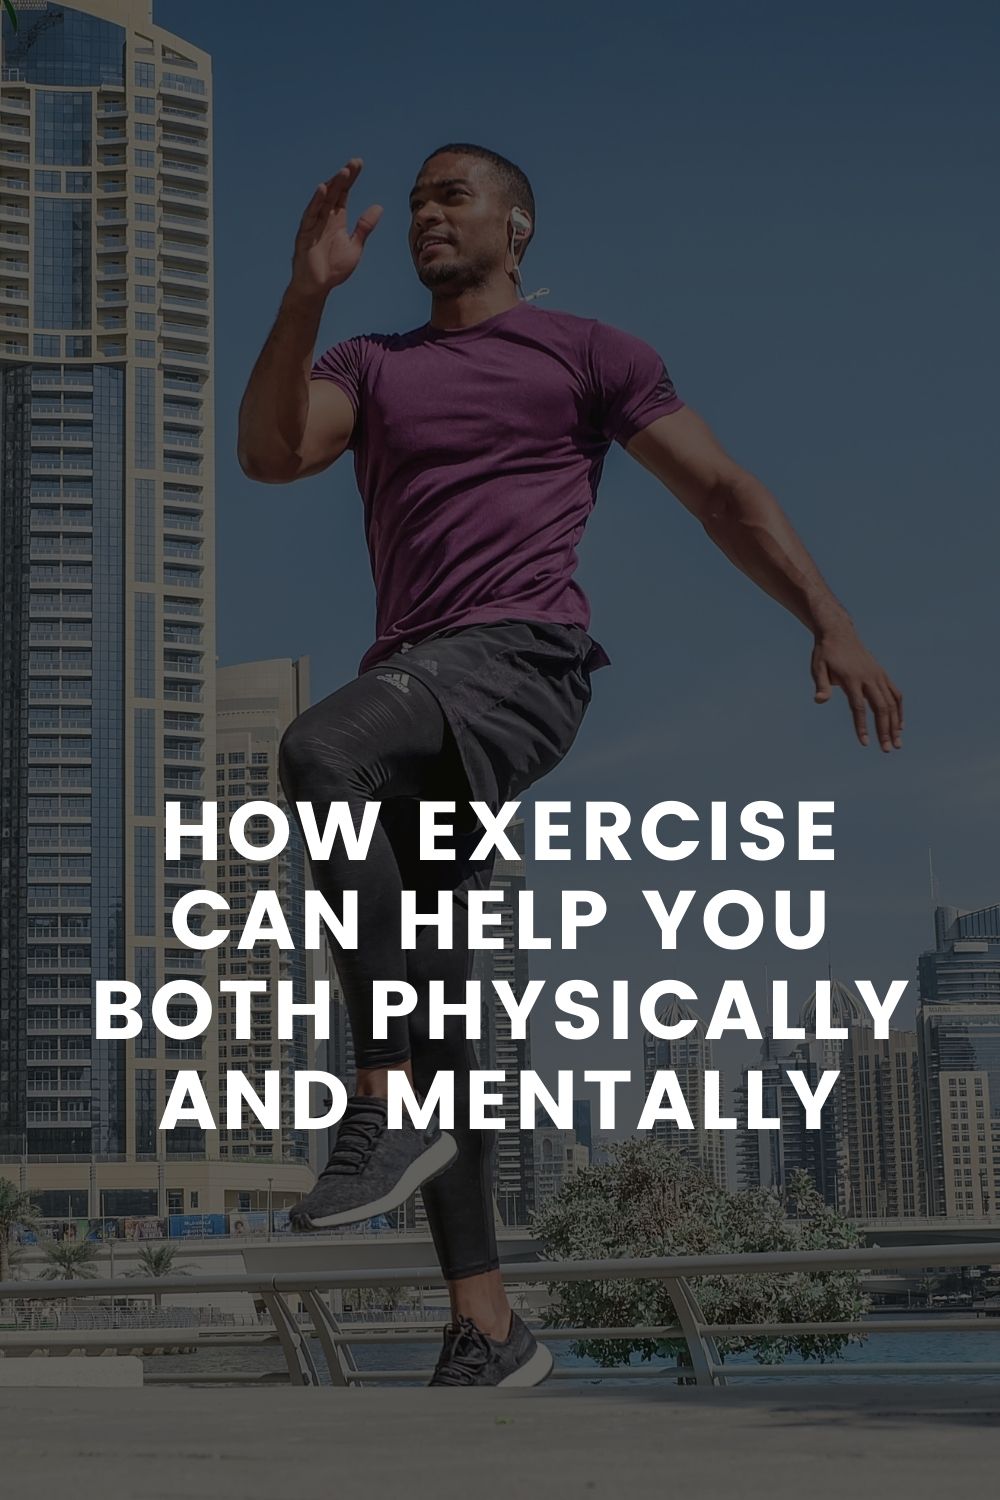 How Exercise Can Help You Both Physically and Mentally